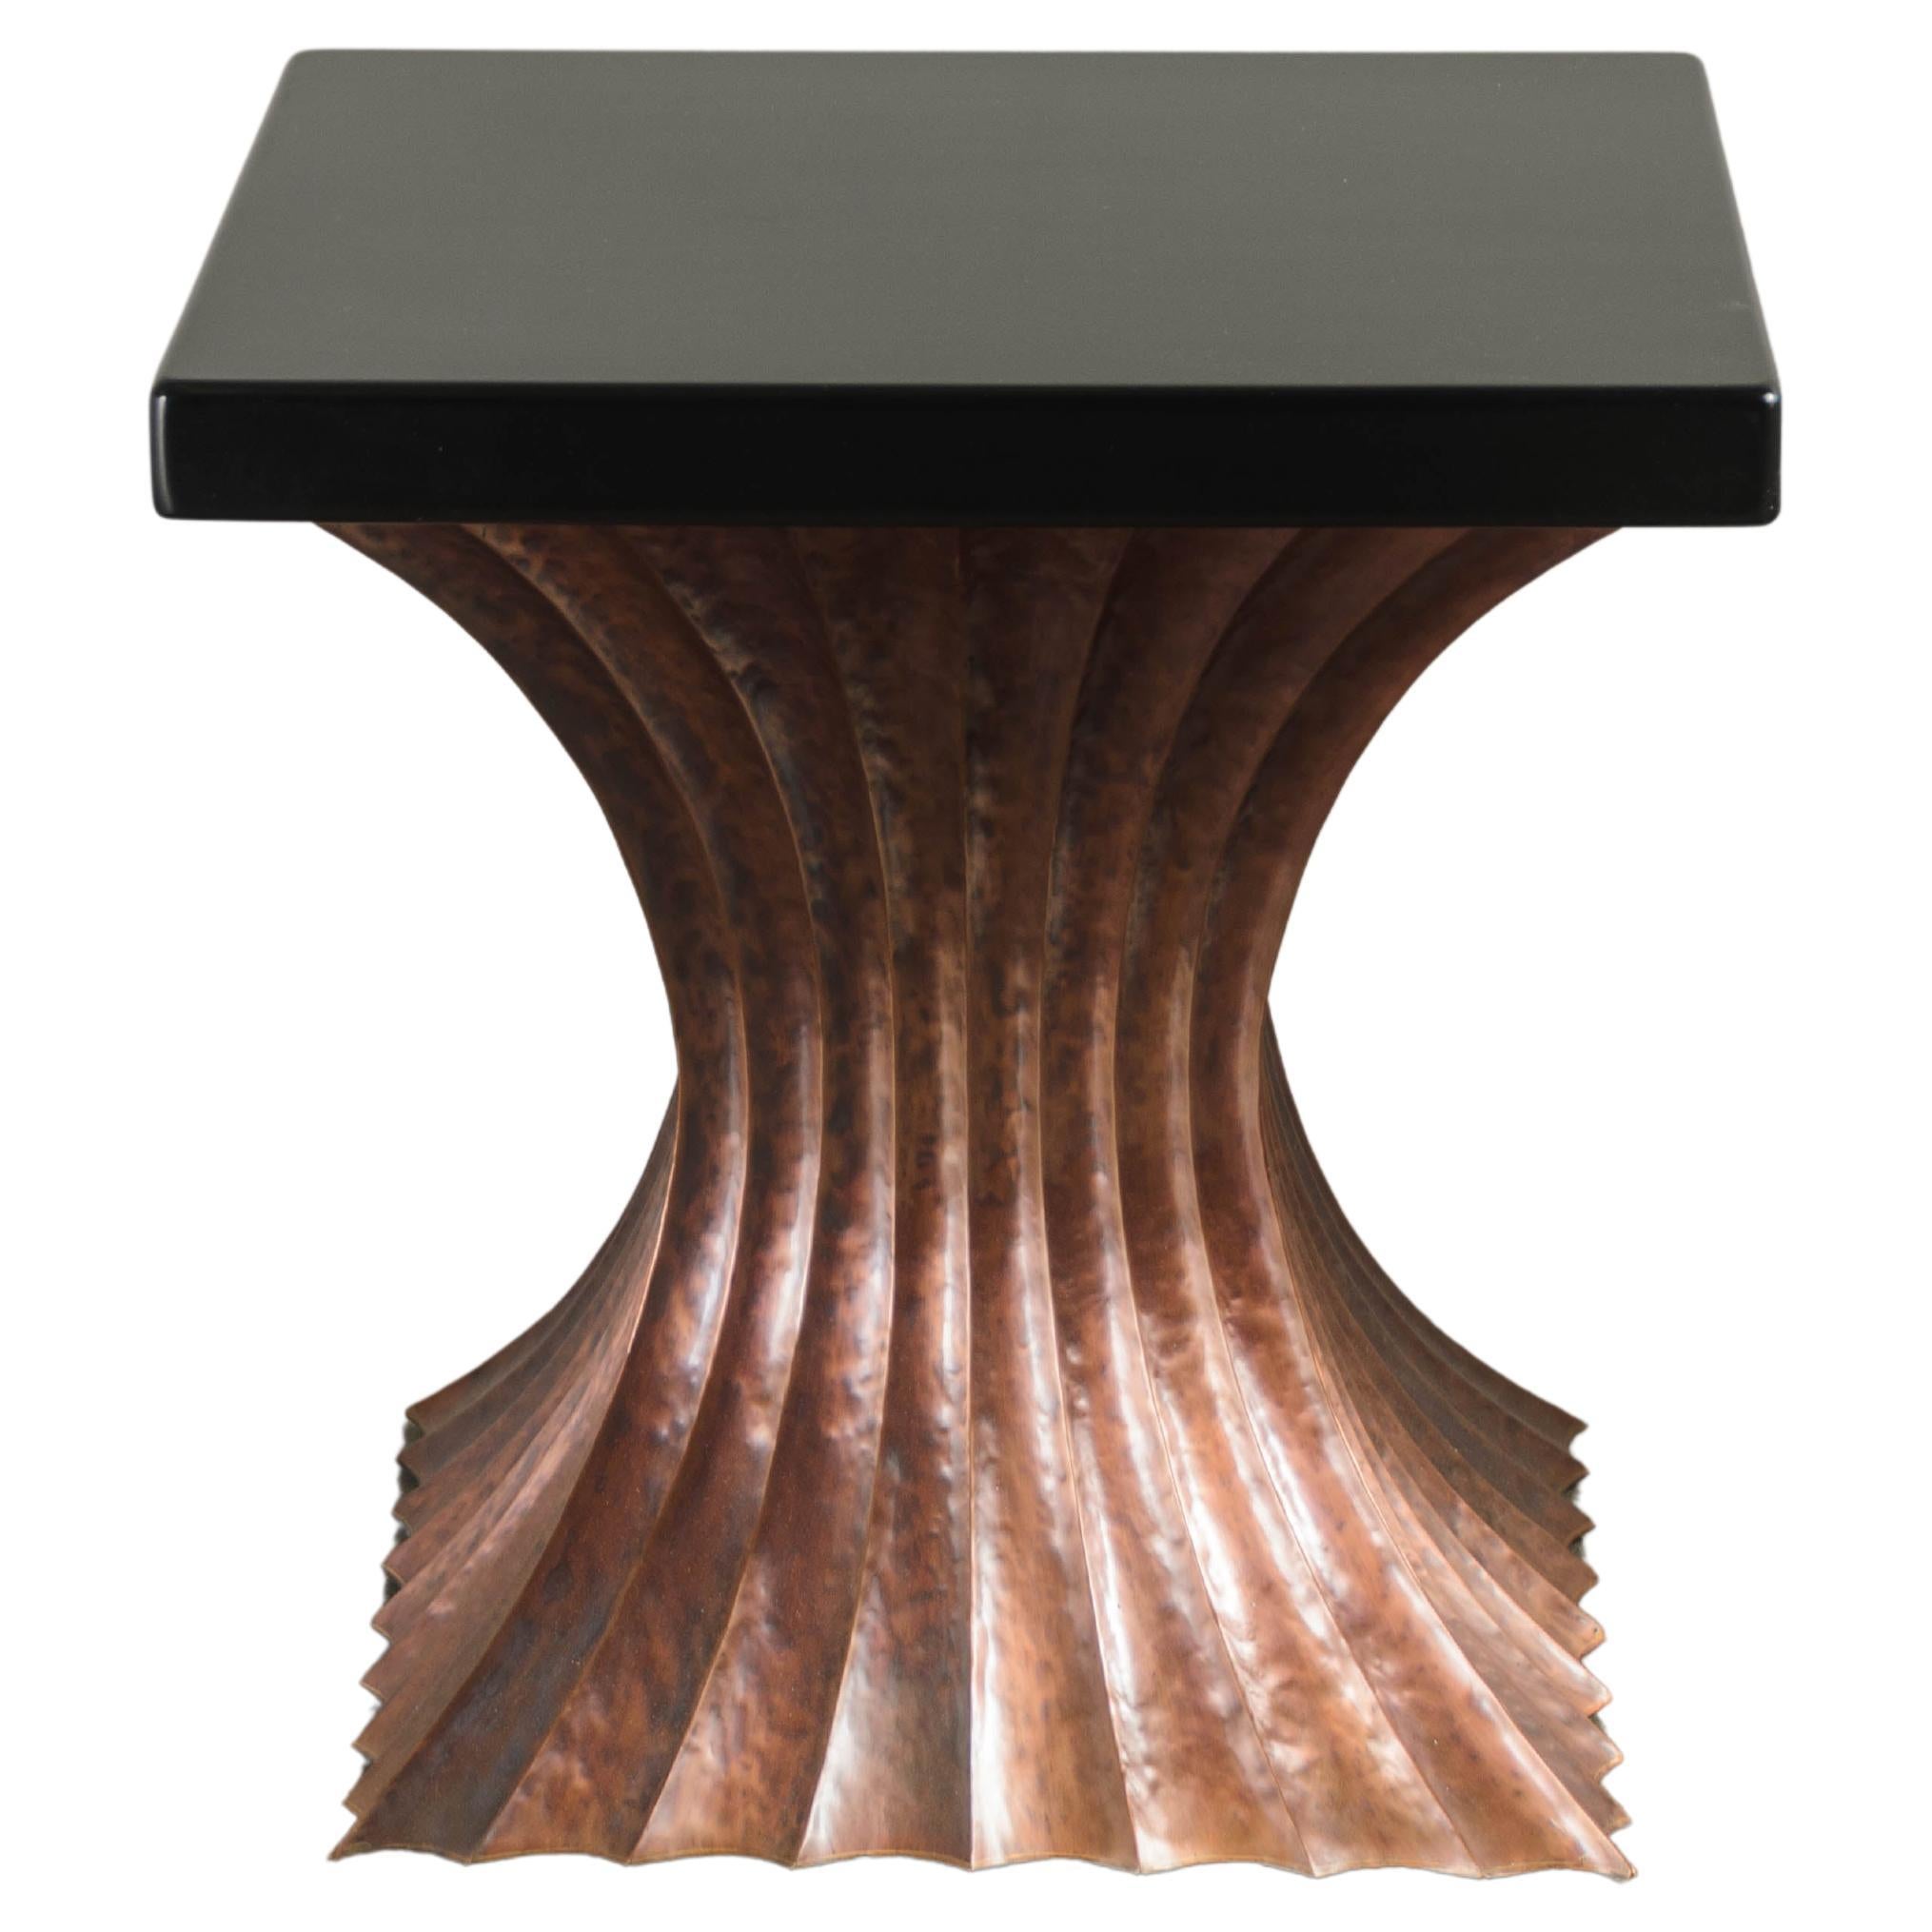 Contemporary Copper Square Fluted Table with Black Lacquer Top by Robert Kuo For Sale